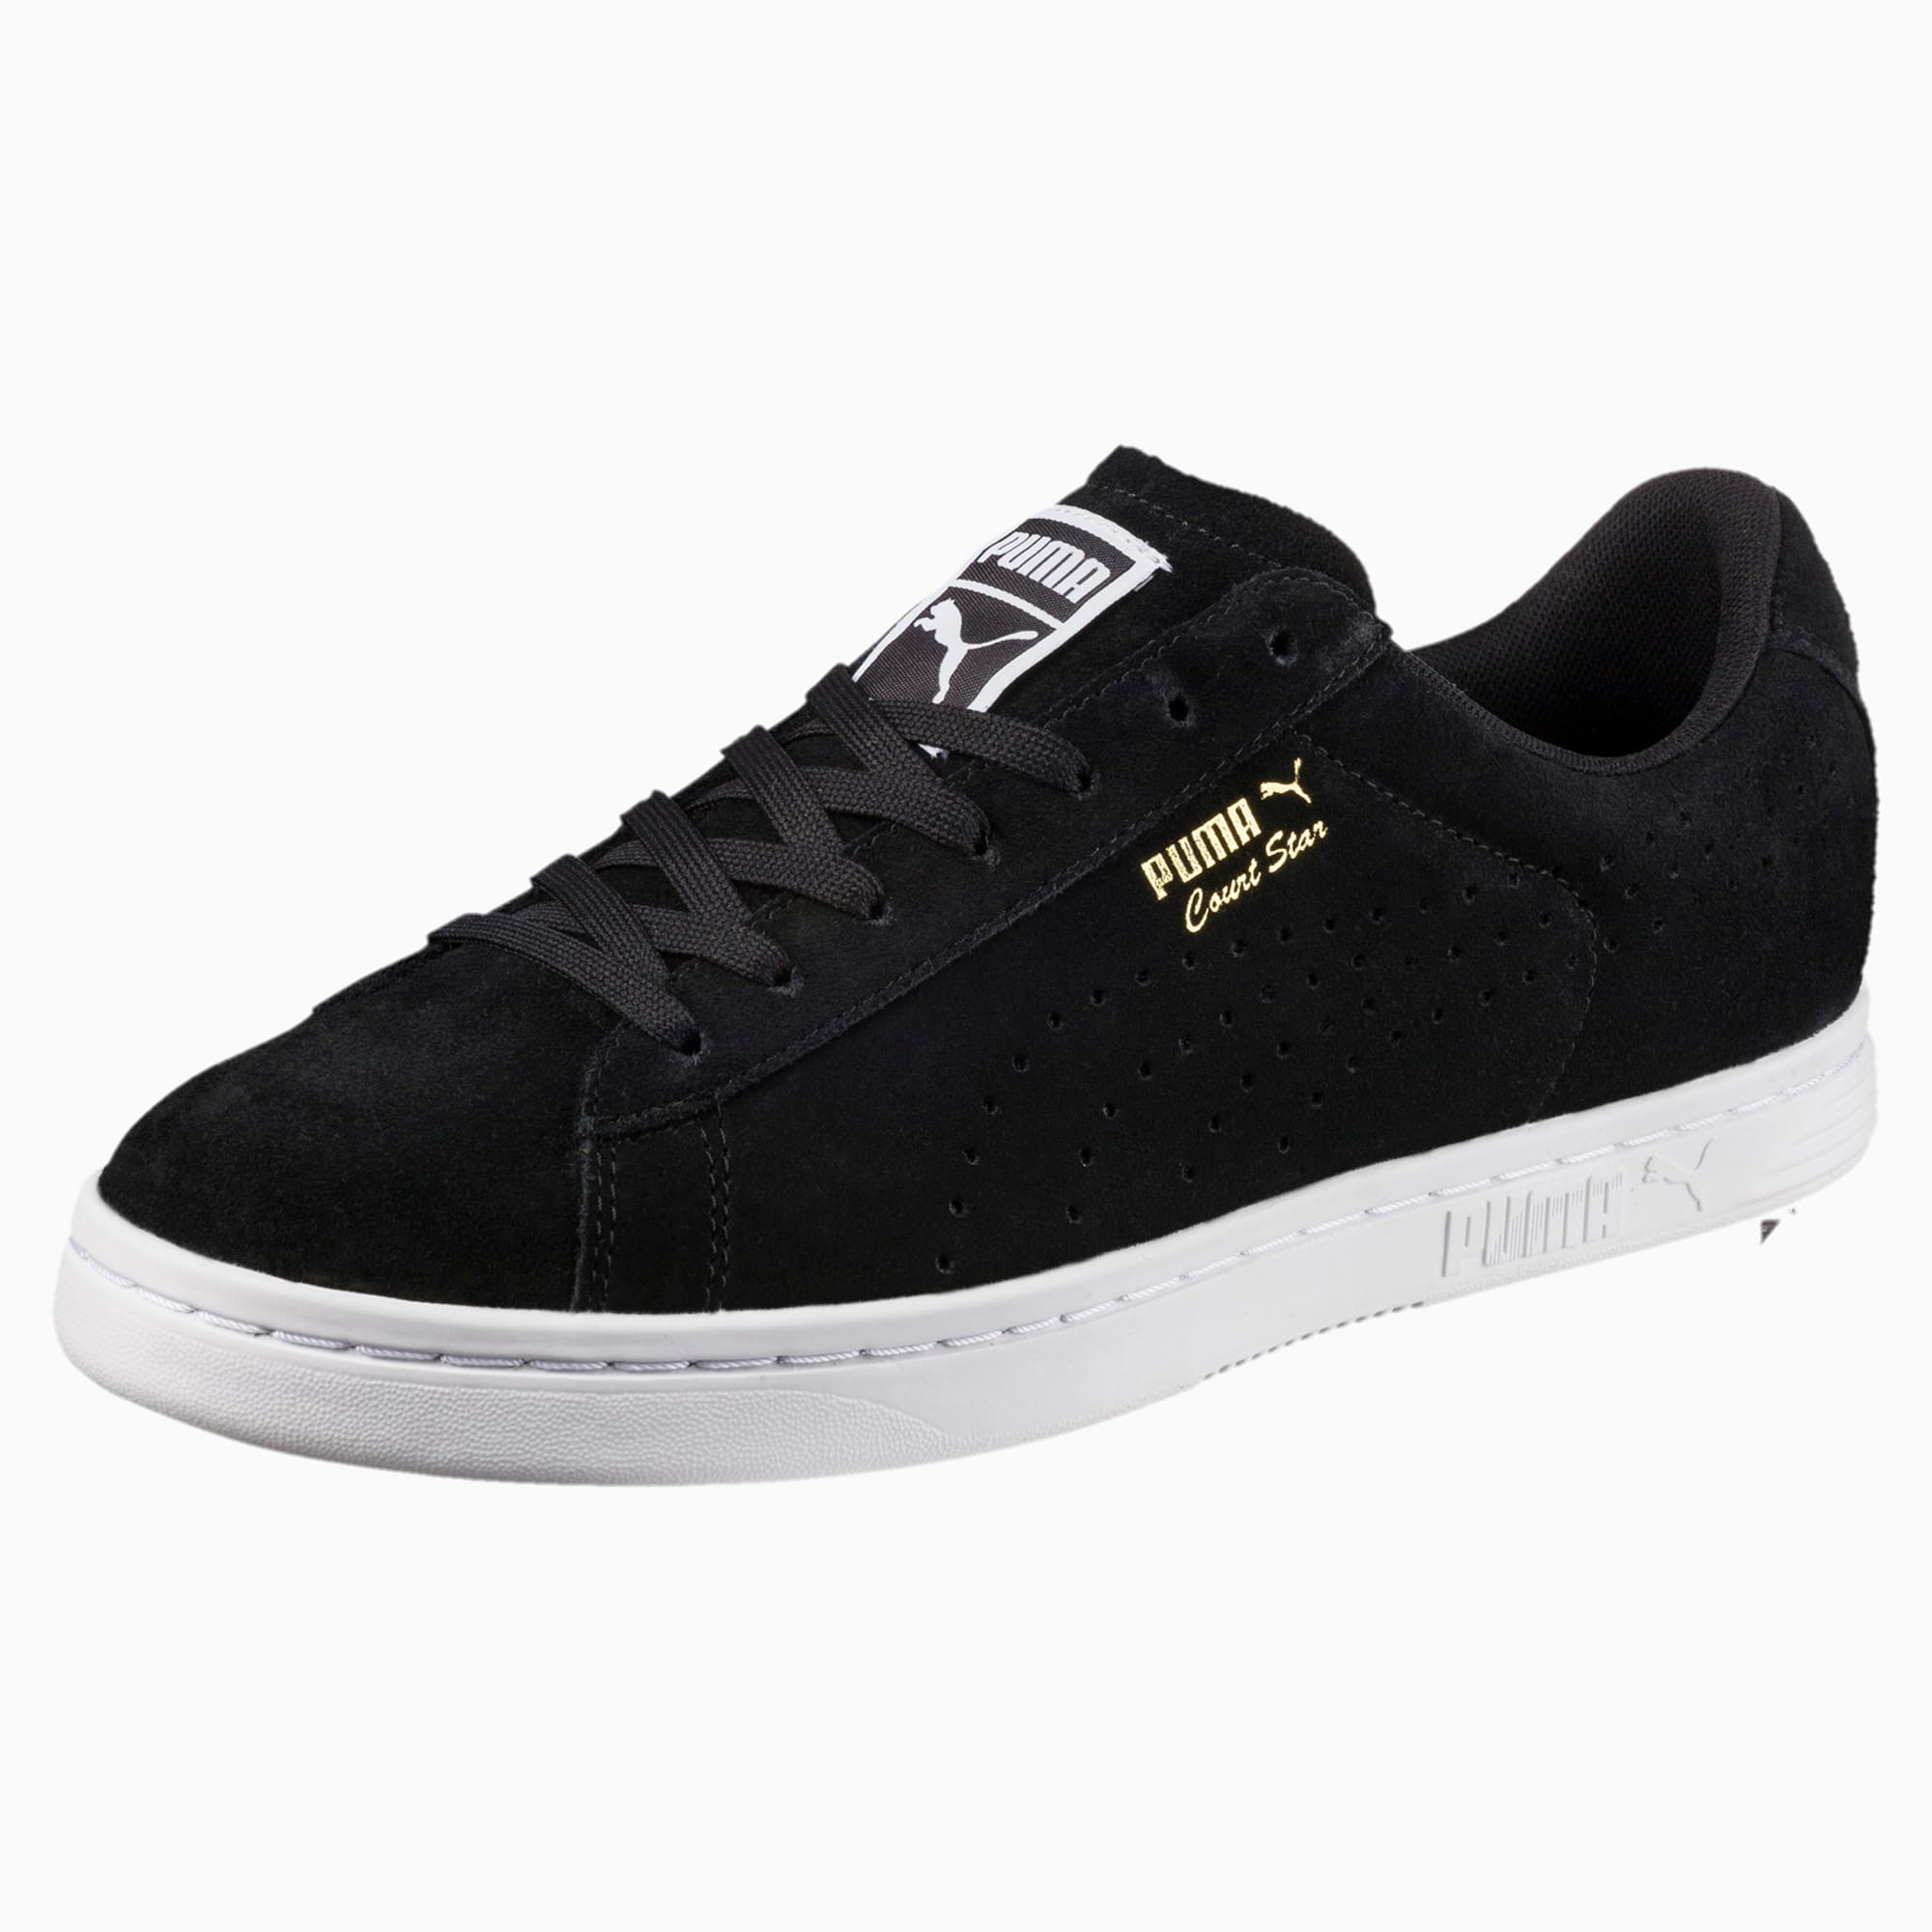 Star Suede Trainers | PUMA New Arrivals 